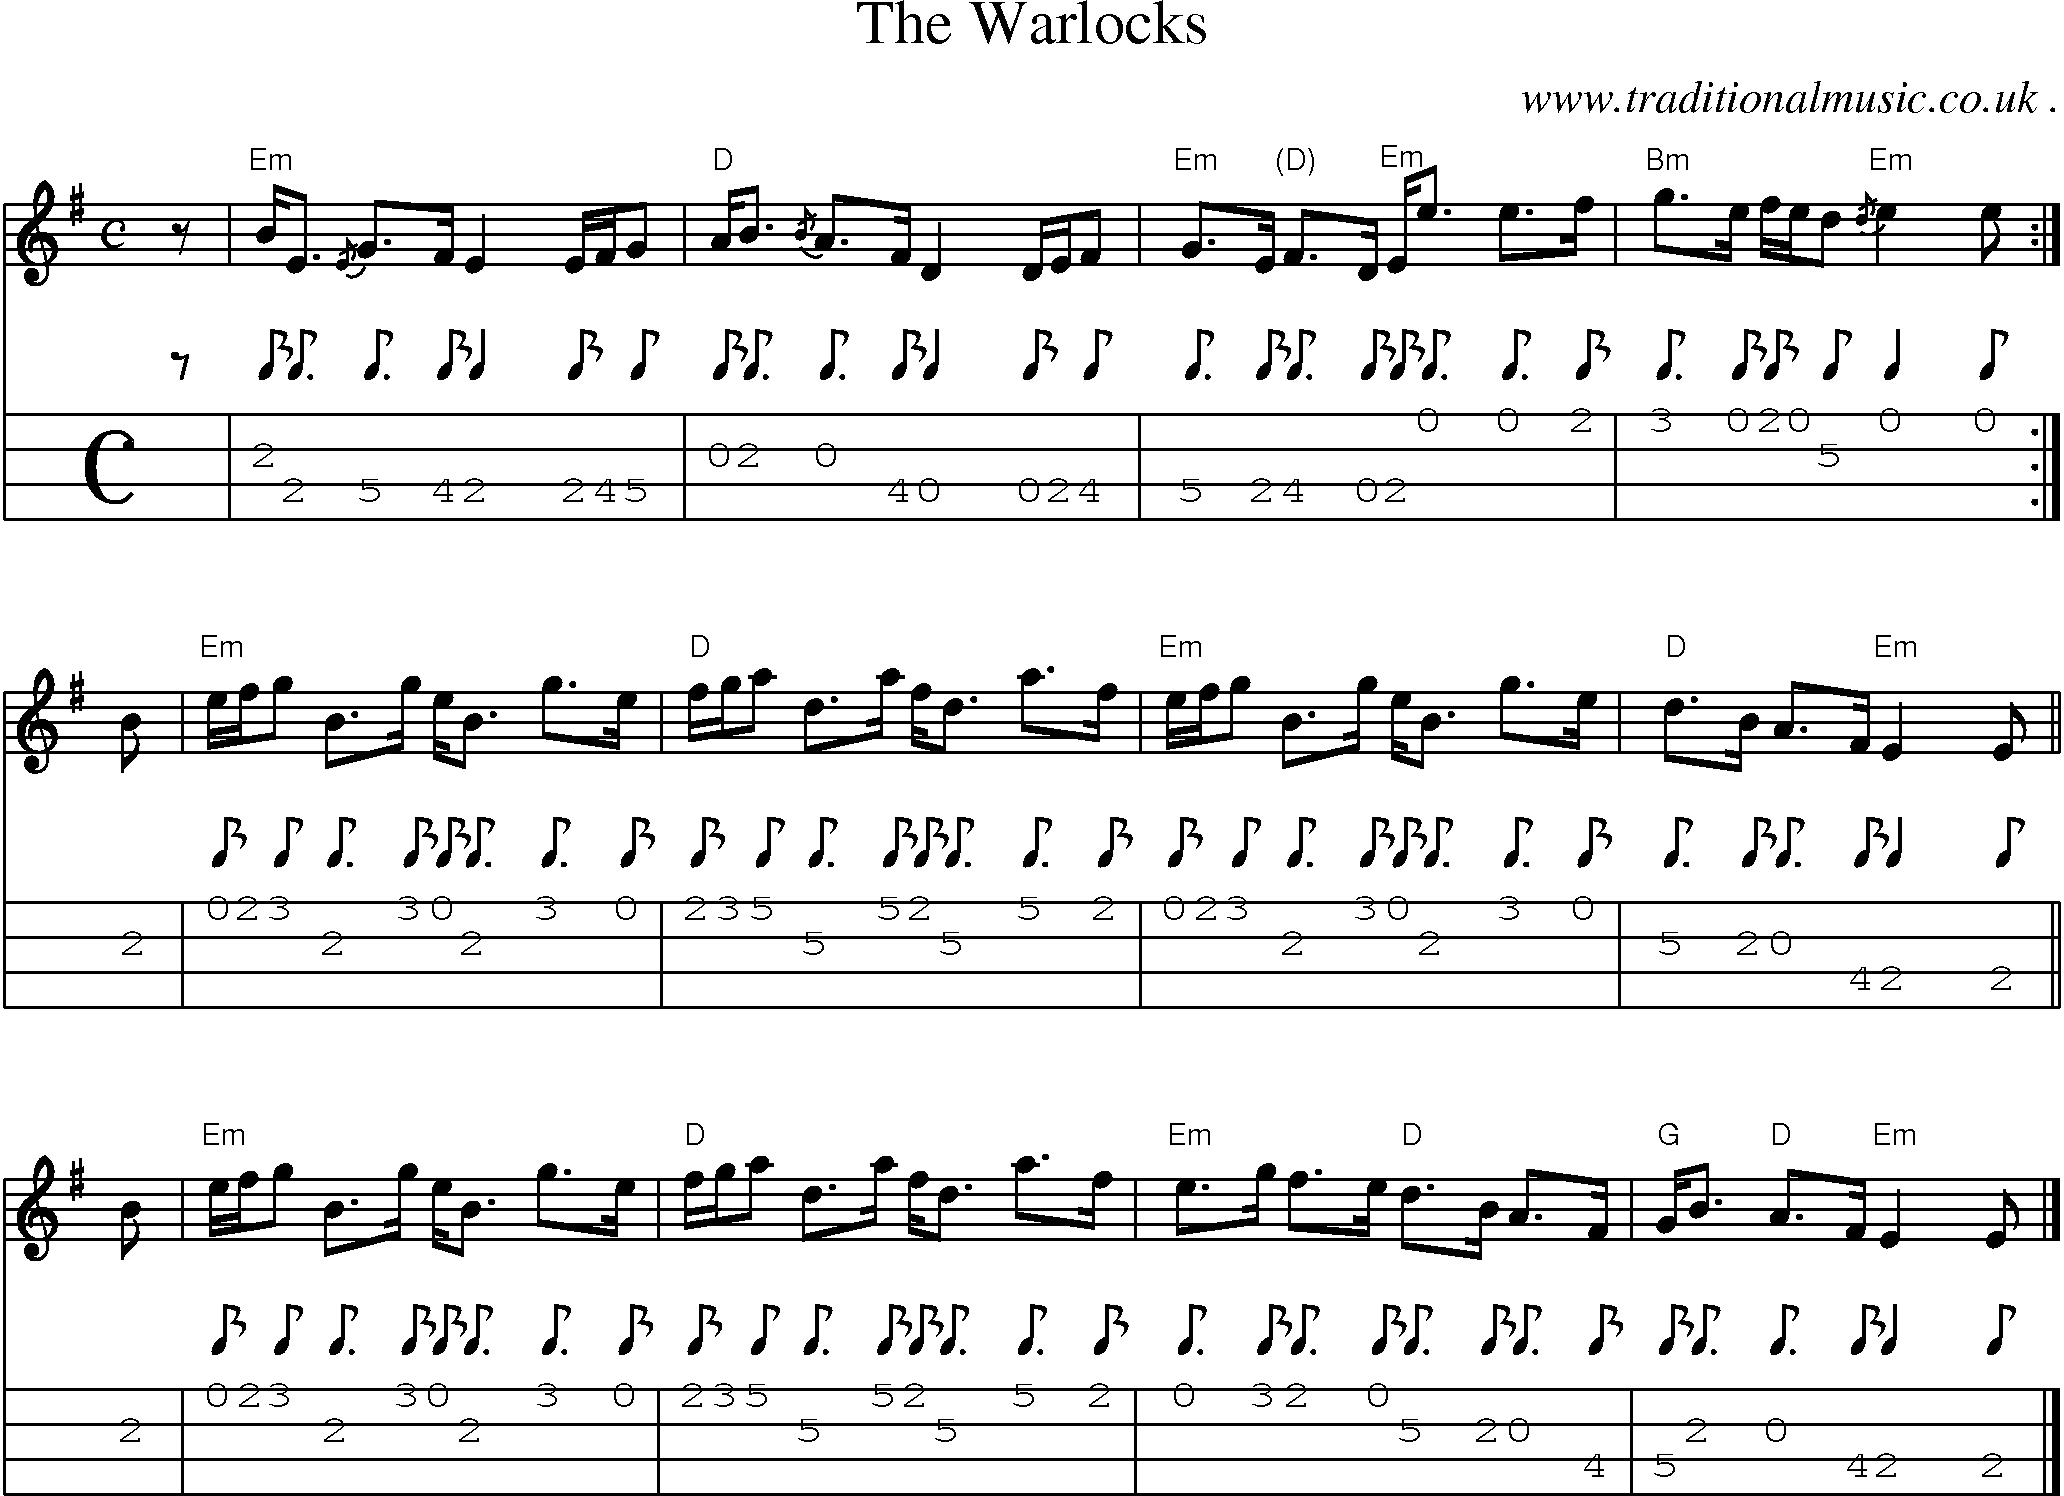 Sheet-music  score, Chords and Mandolin Tabs for The Warlocks